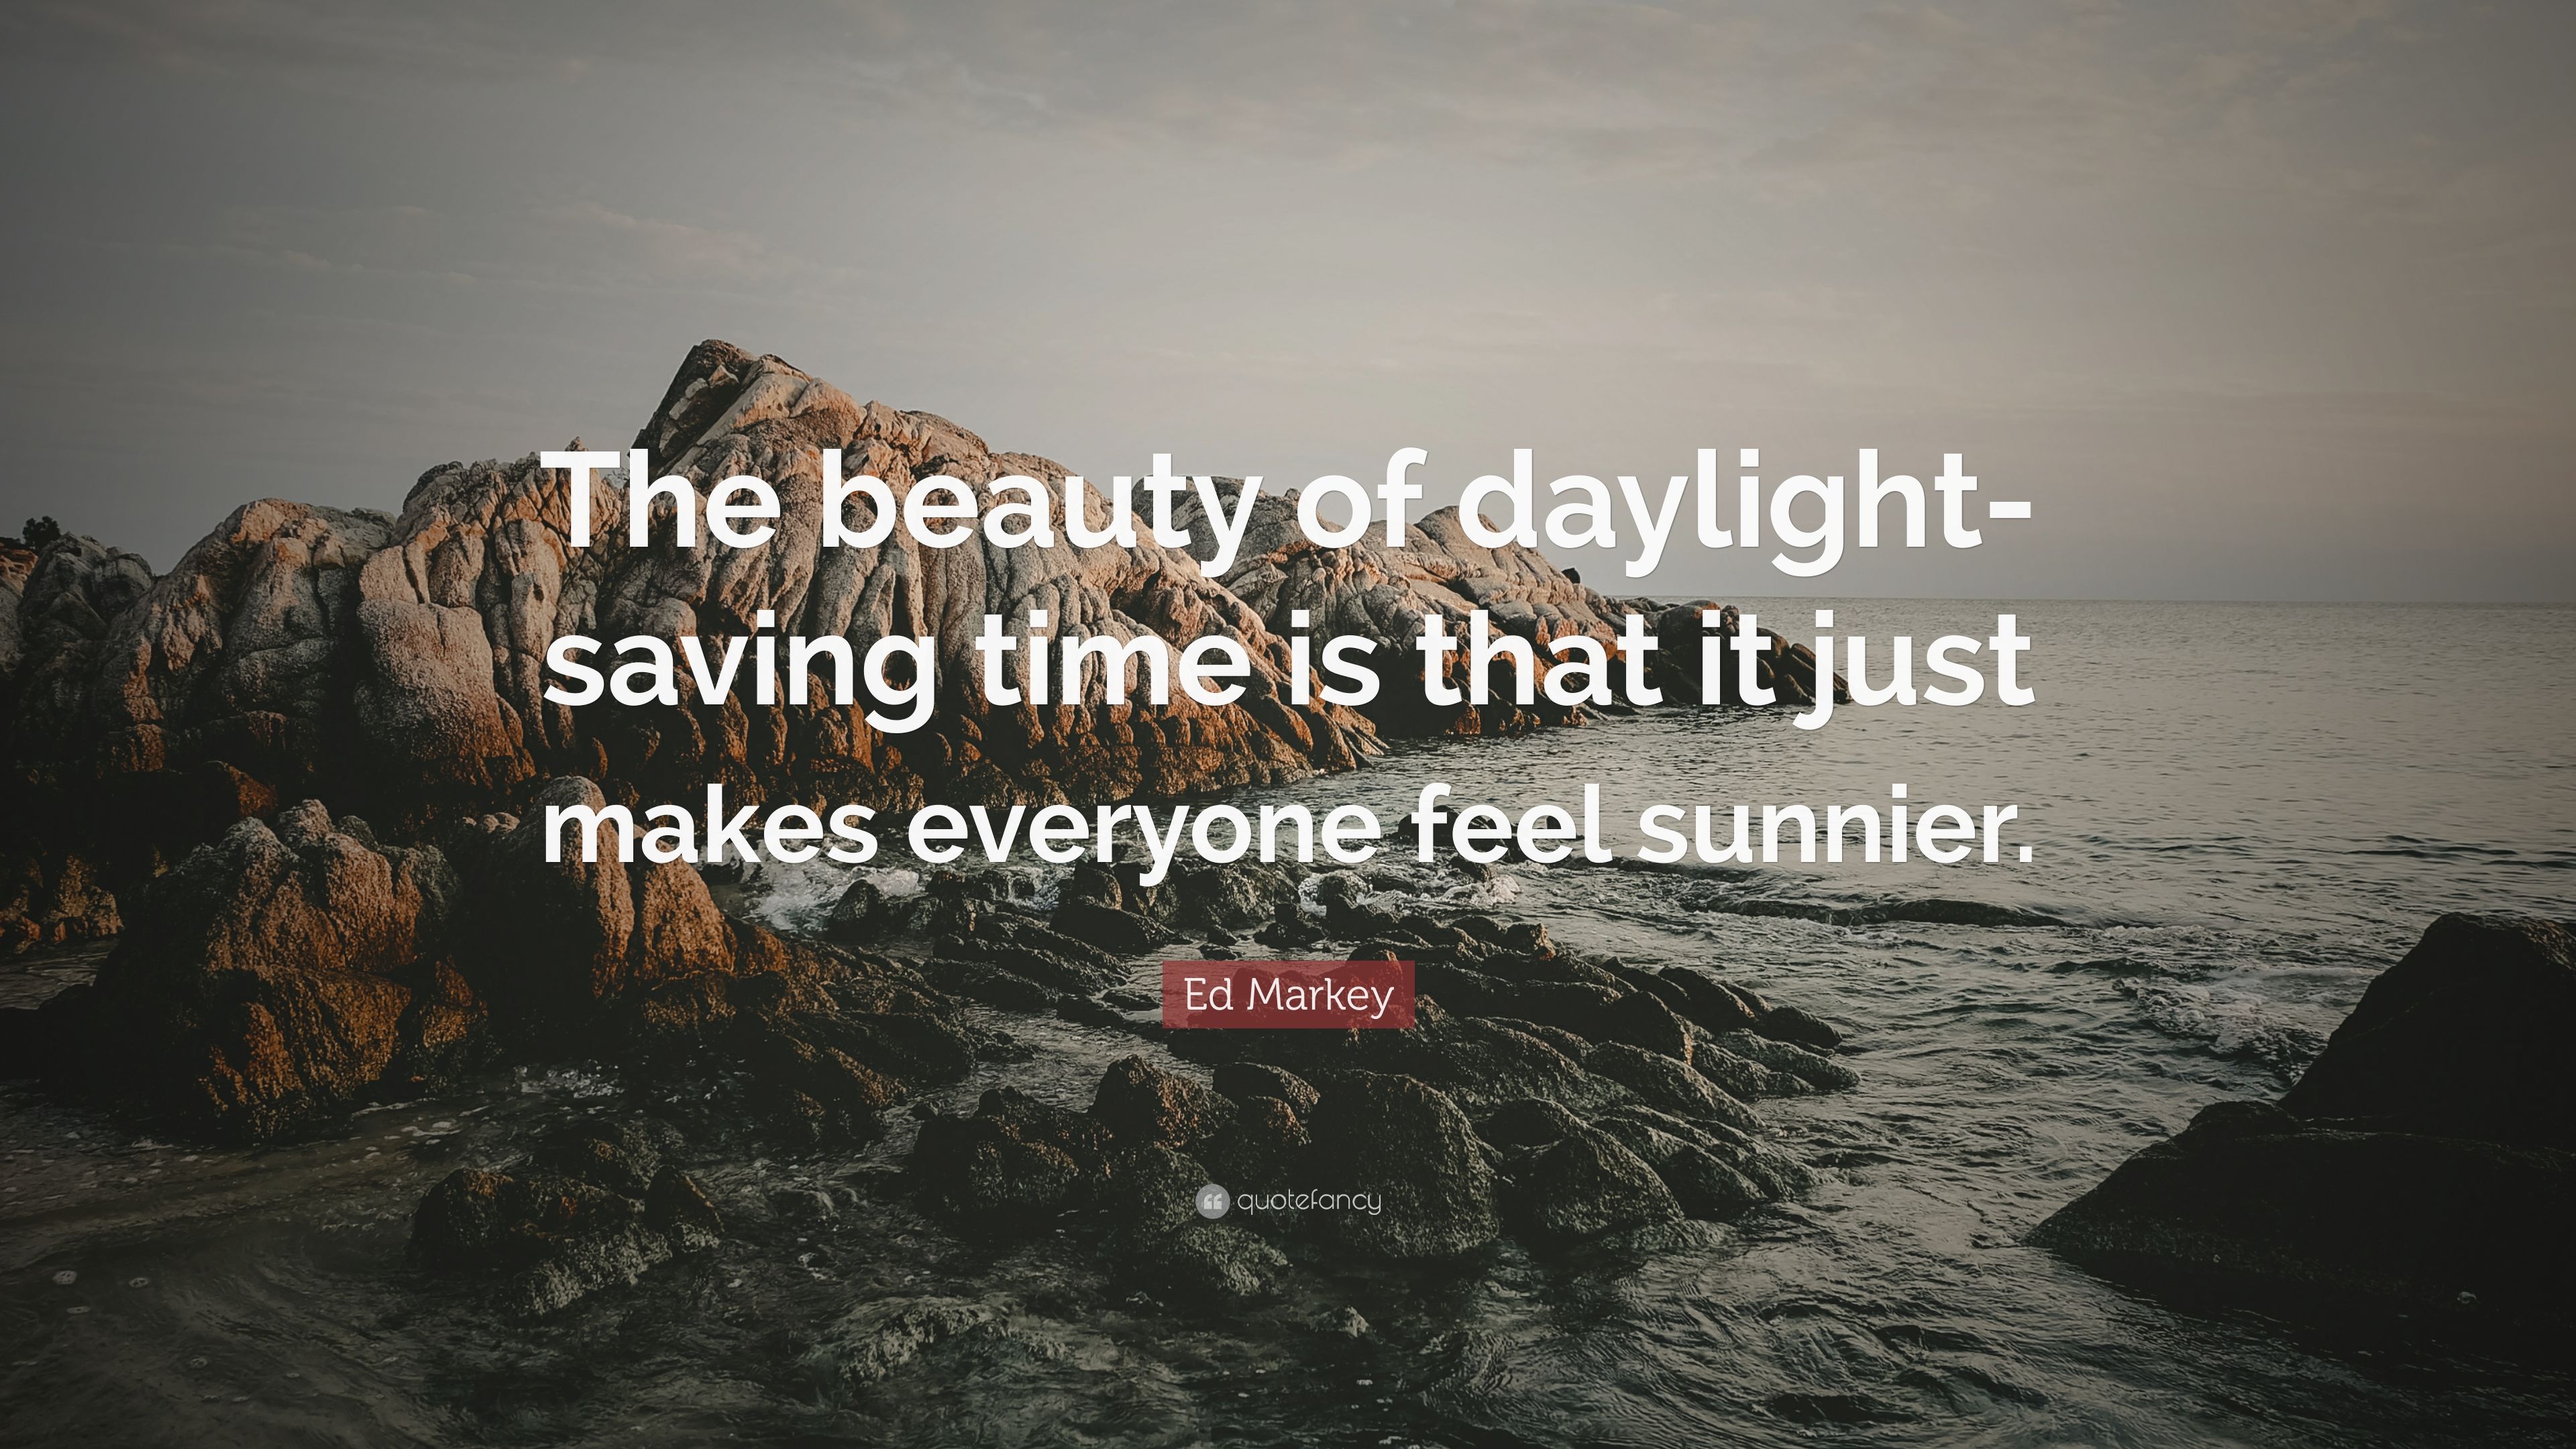 Ed Markey Quote: “The Beauty Of Daylight Saving Time Is That It